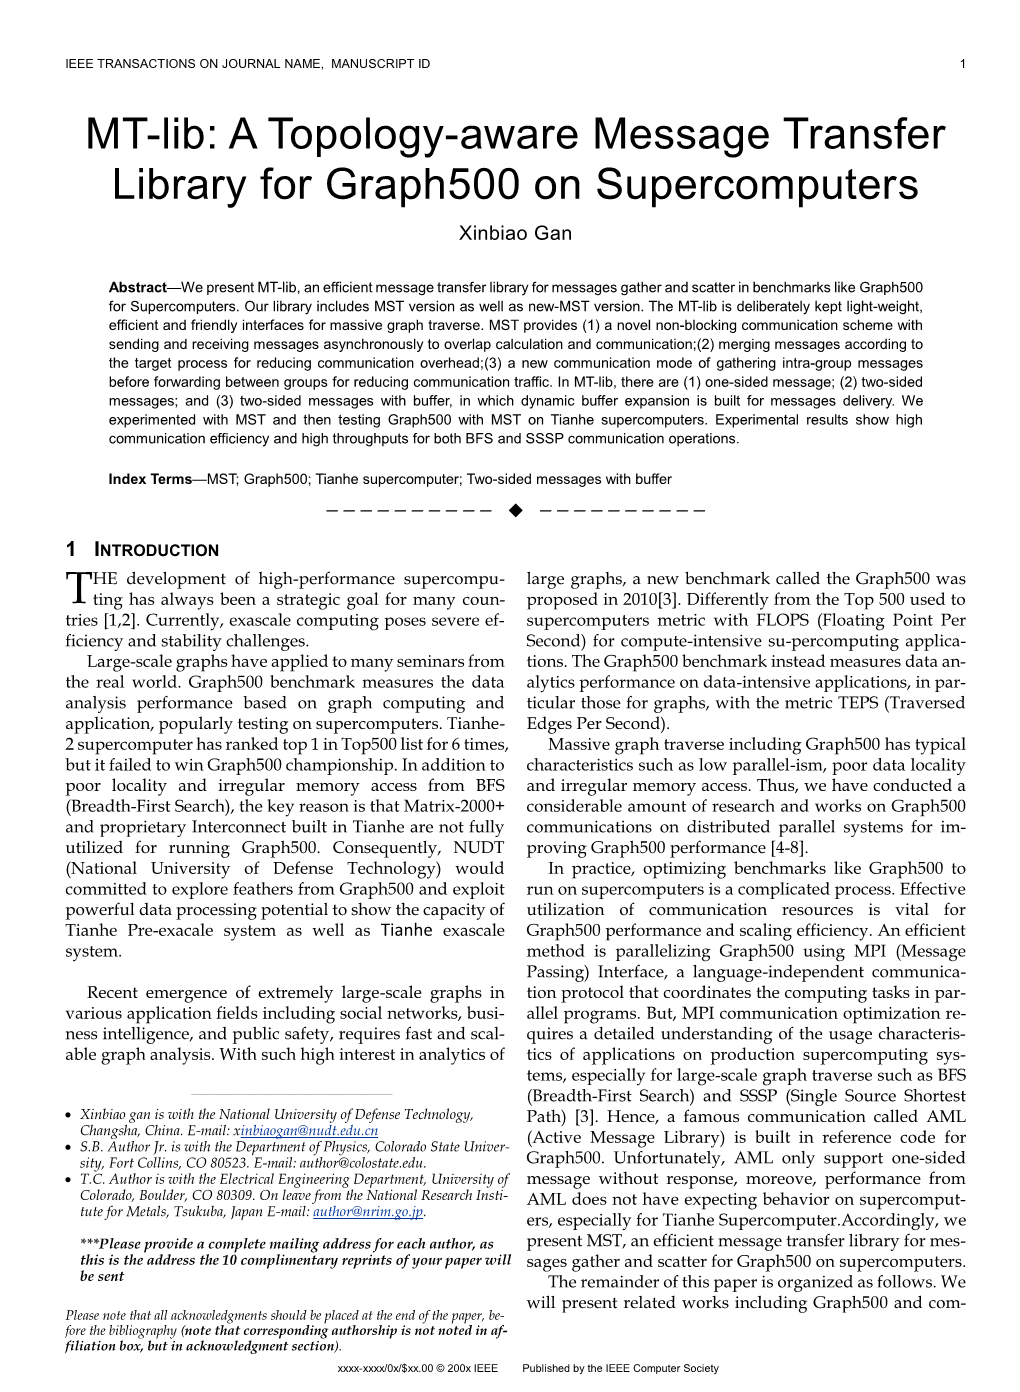 MT-Lib: a Topology-Aware Message Transfer Library for Graph500 on Supercomputers Xinbiao Gan